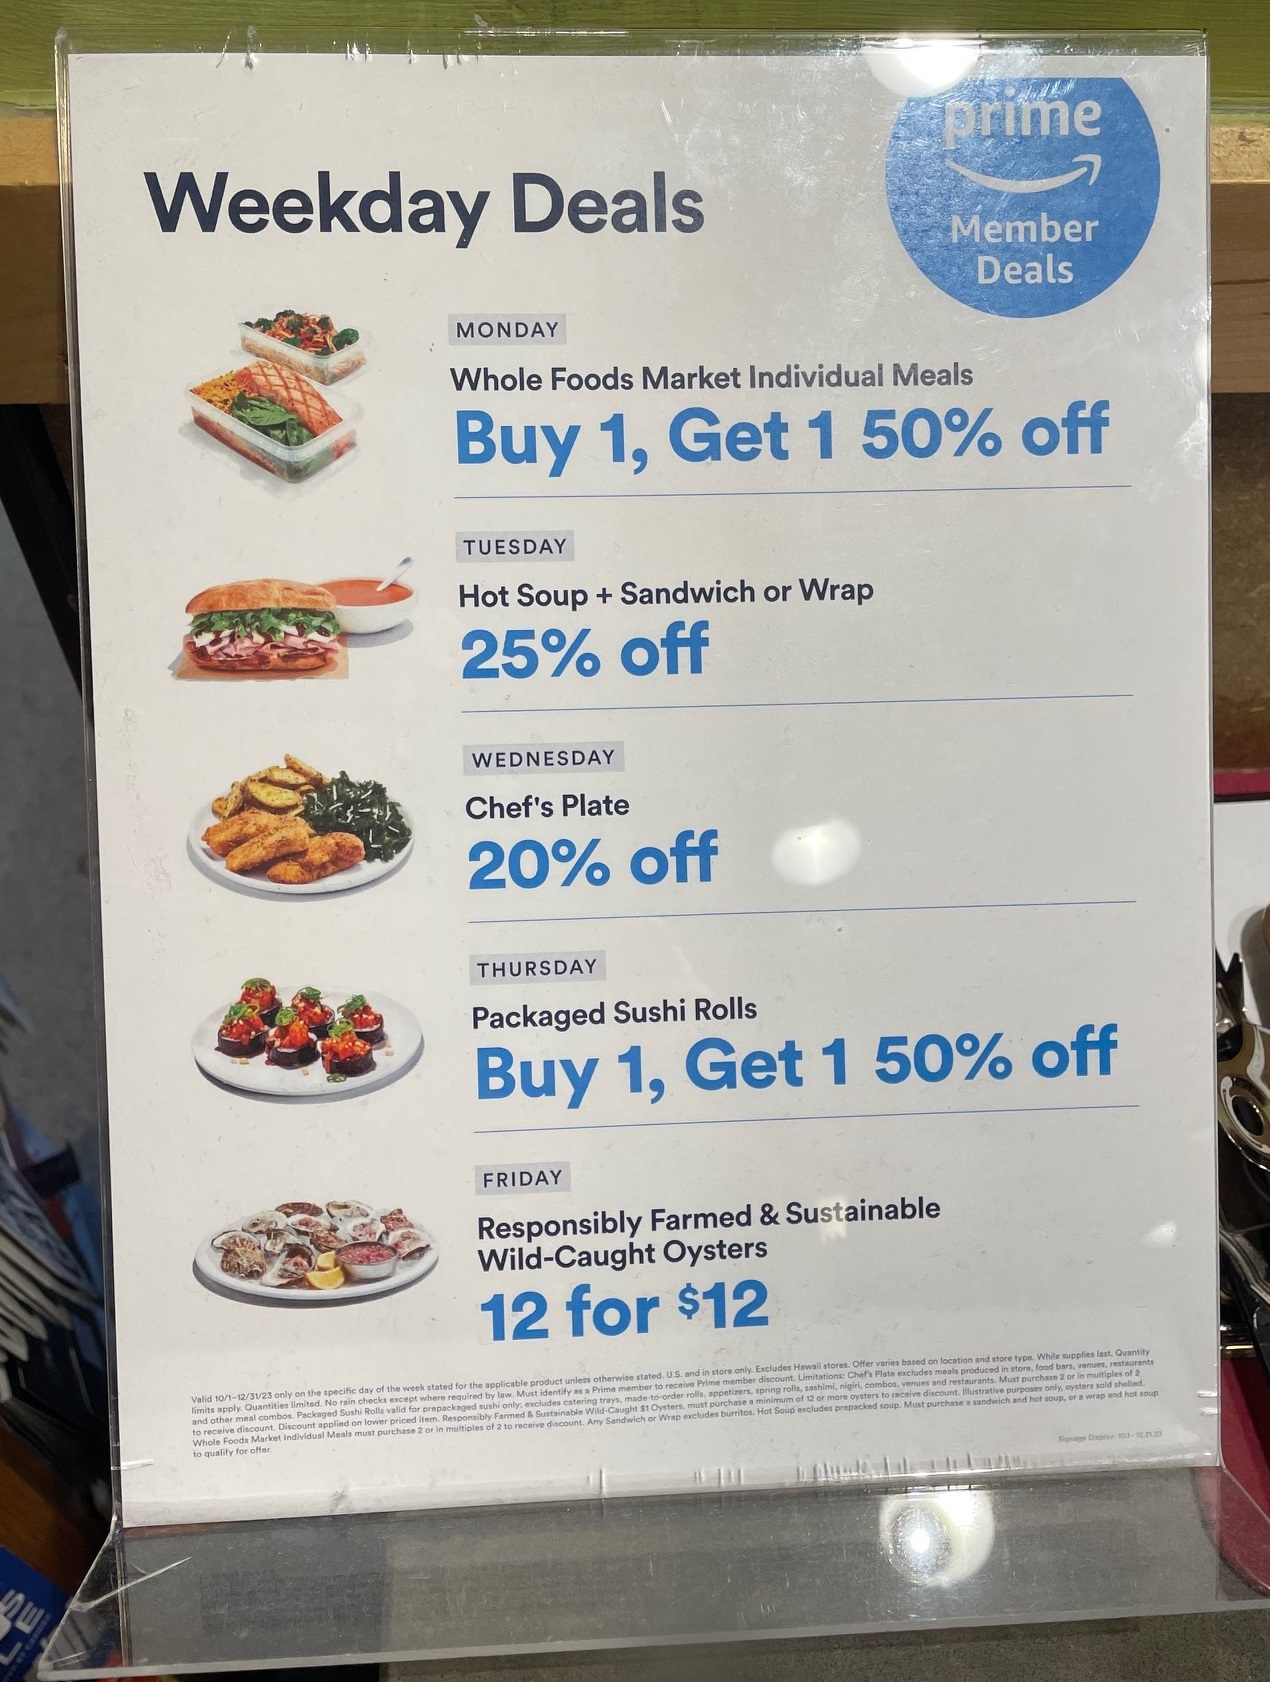 Daily Meal Deals at Whole Foods EatDrinkDeals